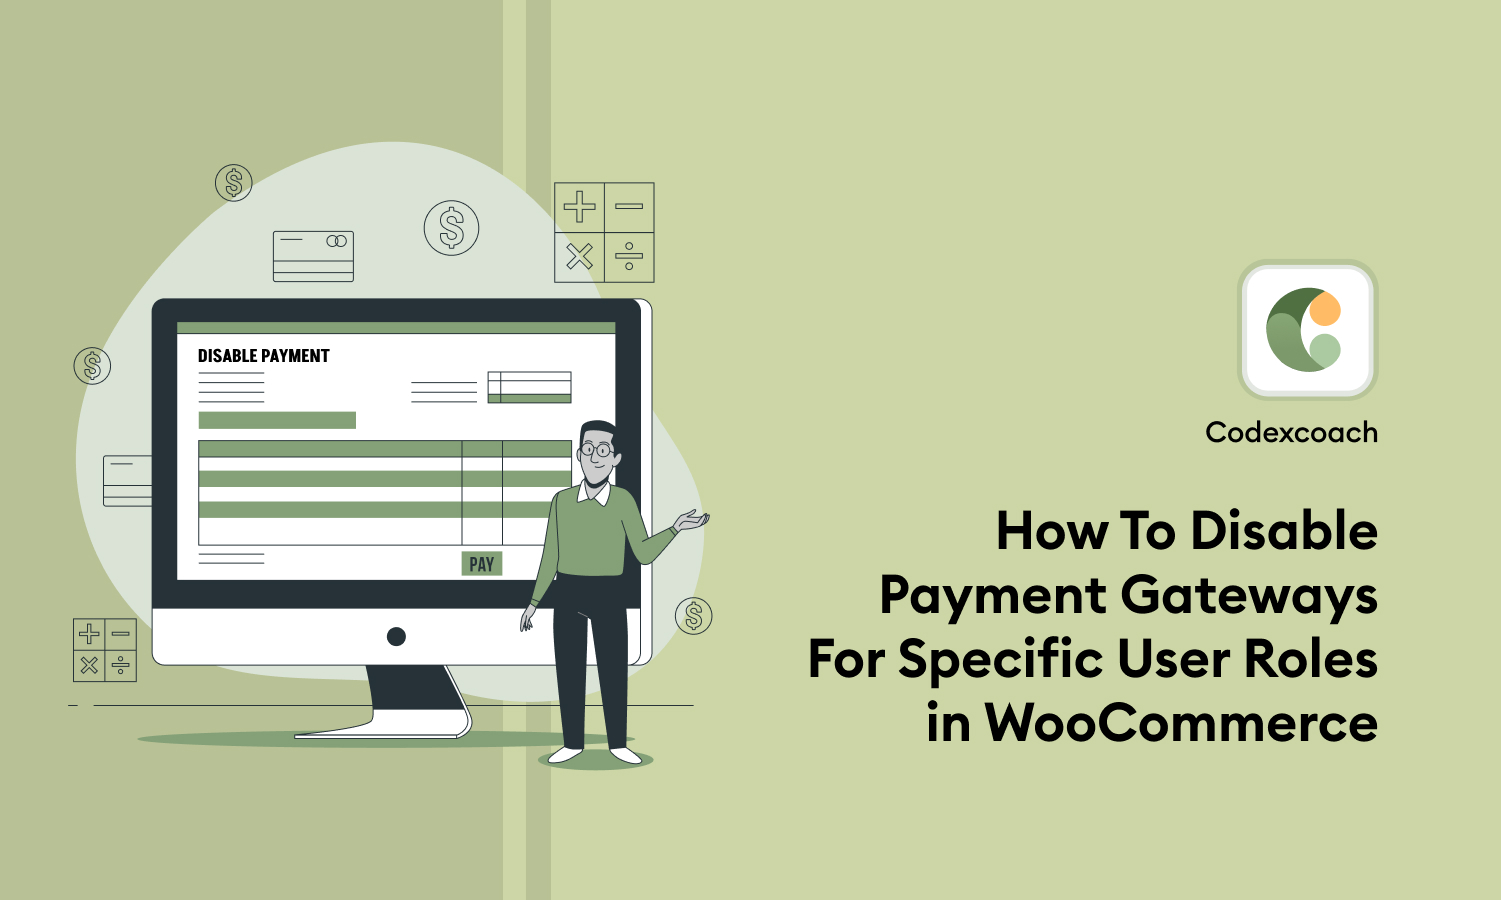 How-To-Disable-Payment-Gateways-For-Specific-User-Roles-in-WooCommerce